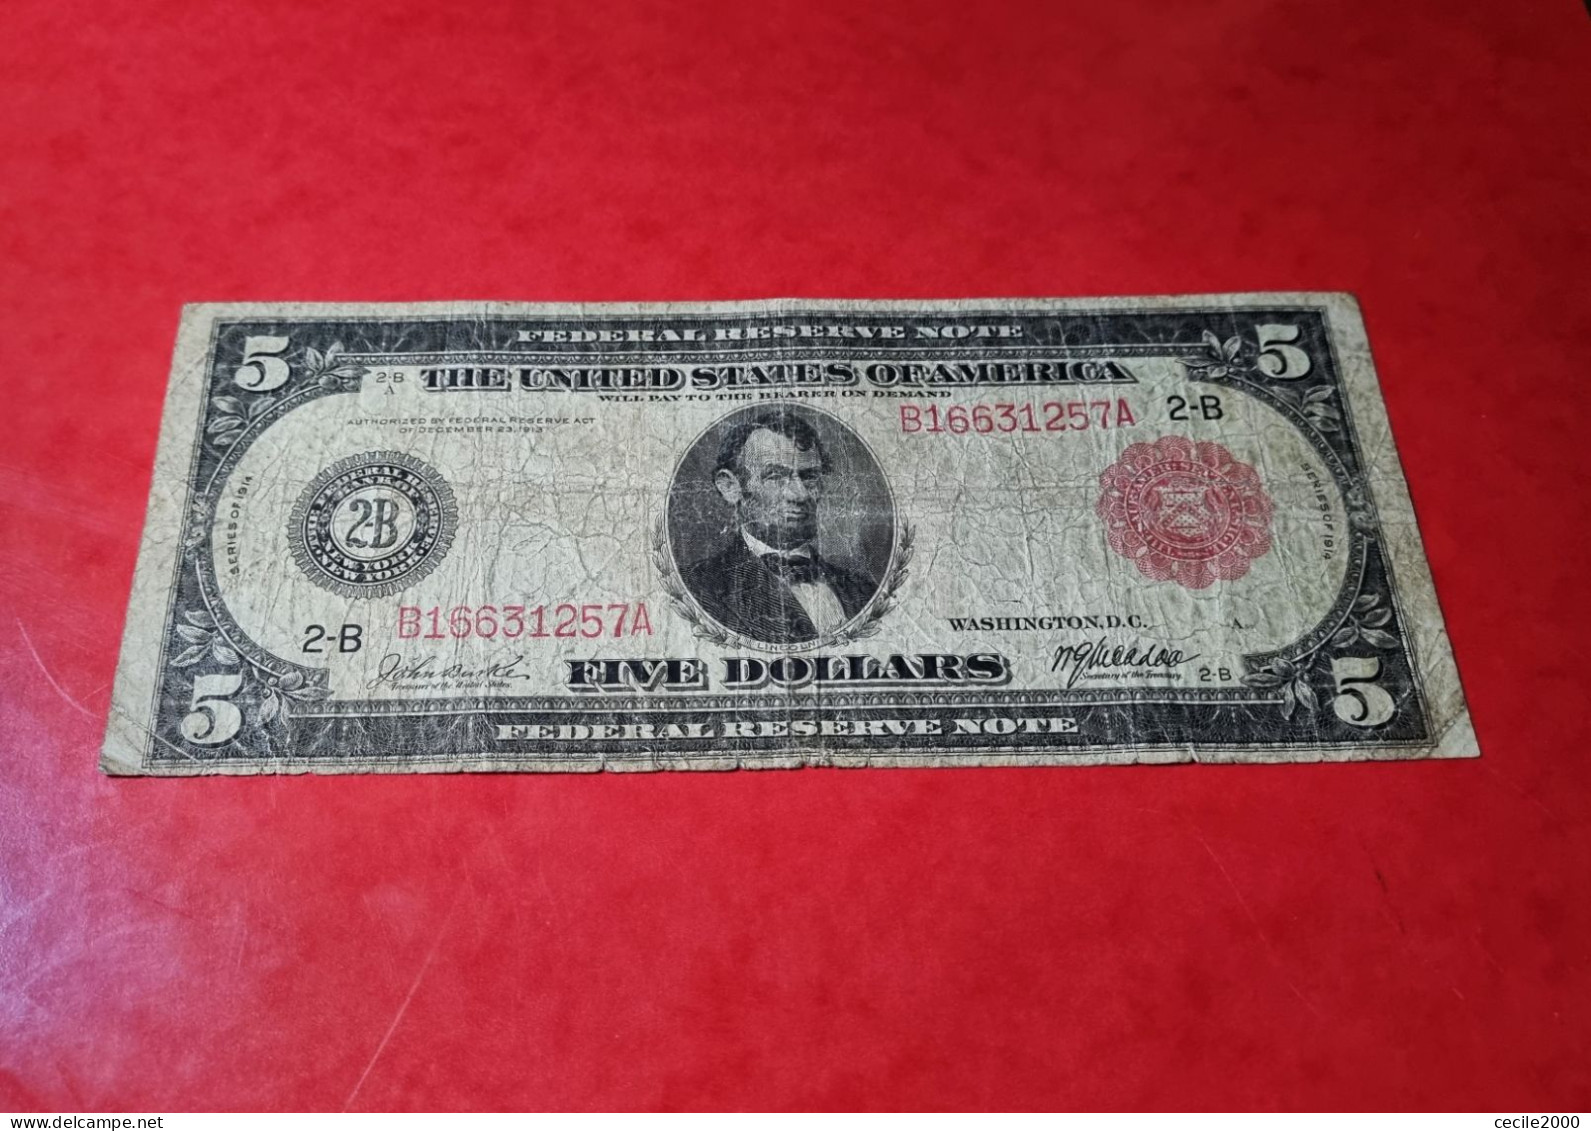 SCARCE 1914 USA $5 DOLLARS *RED SEAL* UNITED STATES BANKNOTE F BILLETE ESTADOS UNIDOS COMPRAS MULTIPLES CONSULTAR - United States Notes (1862-1923)